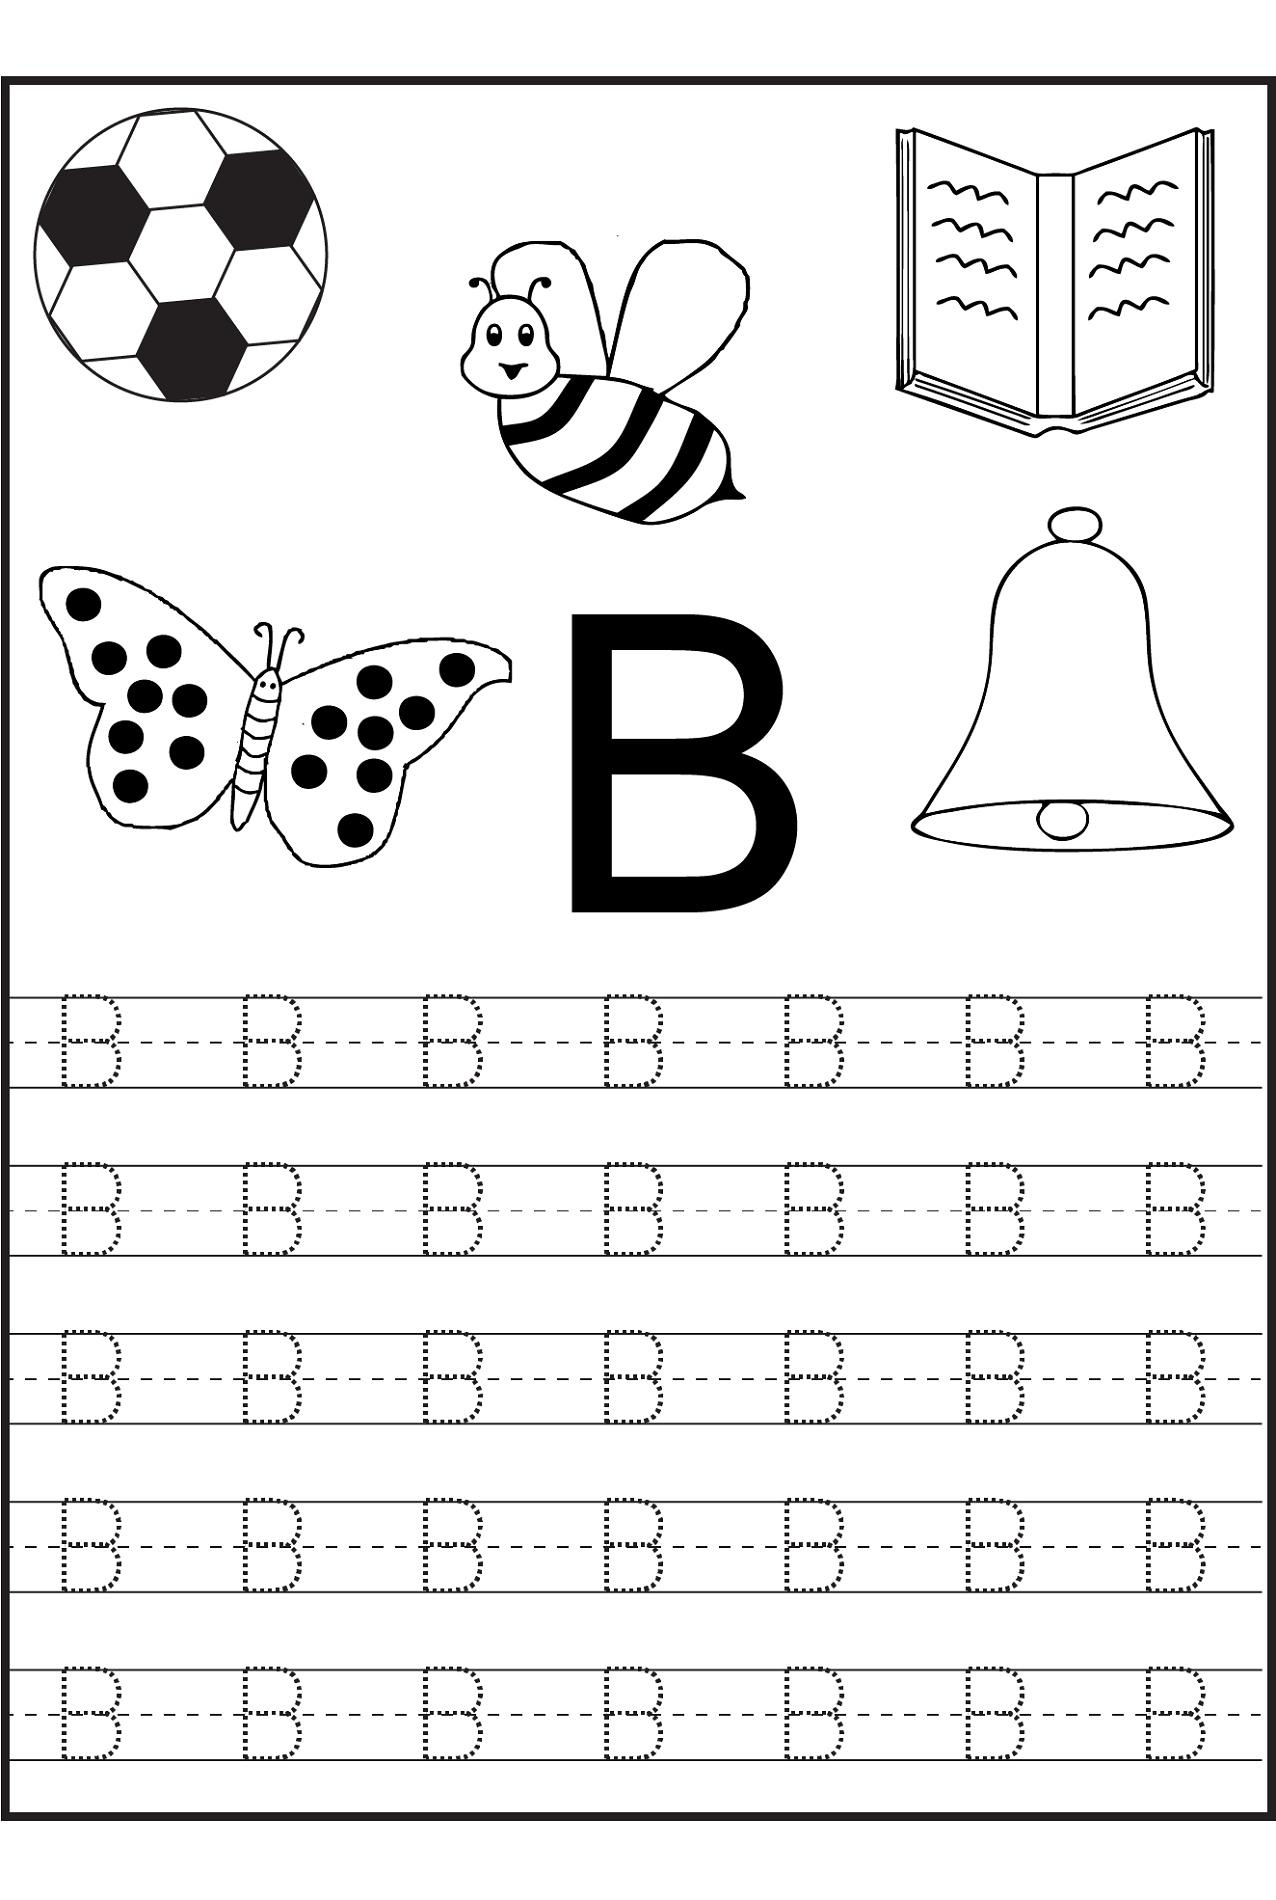 Traceable Letters Worksheets Activity Shelter